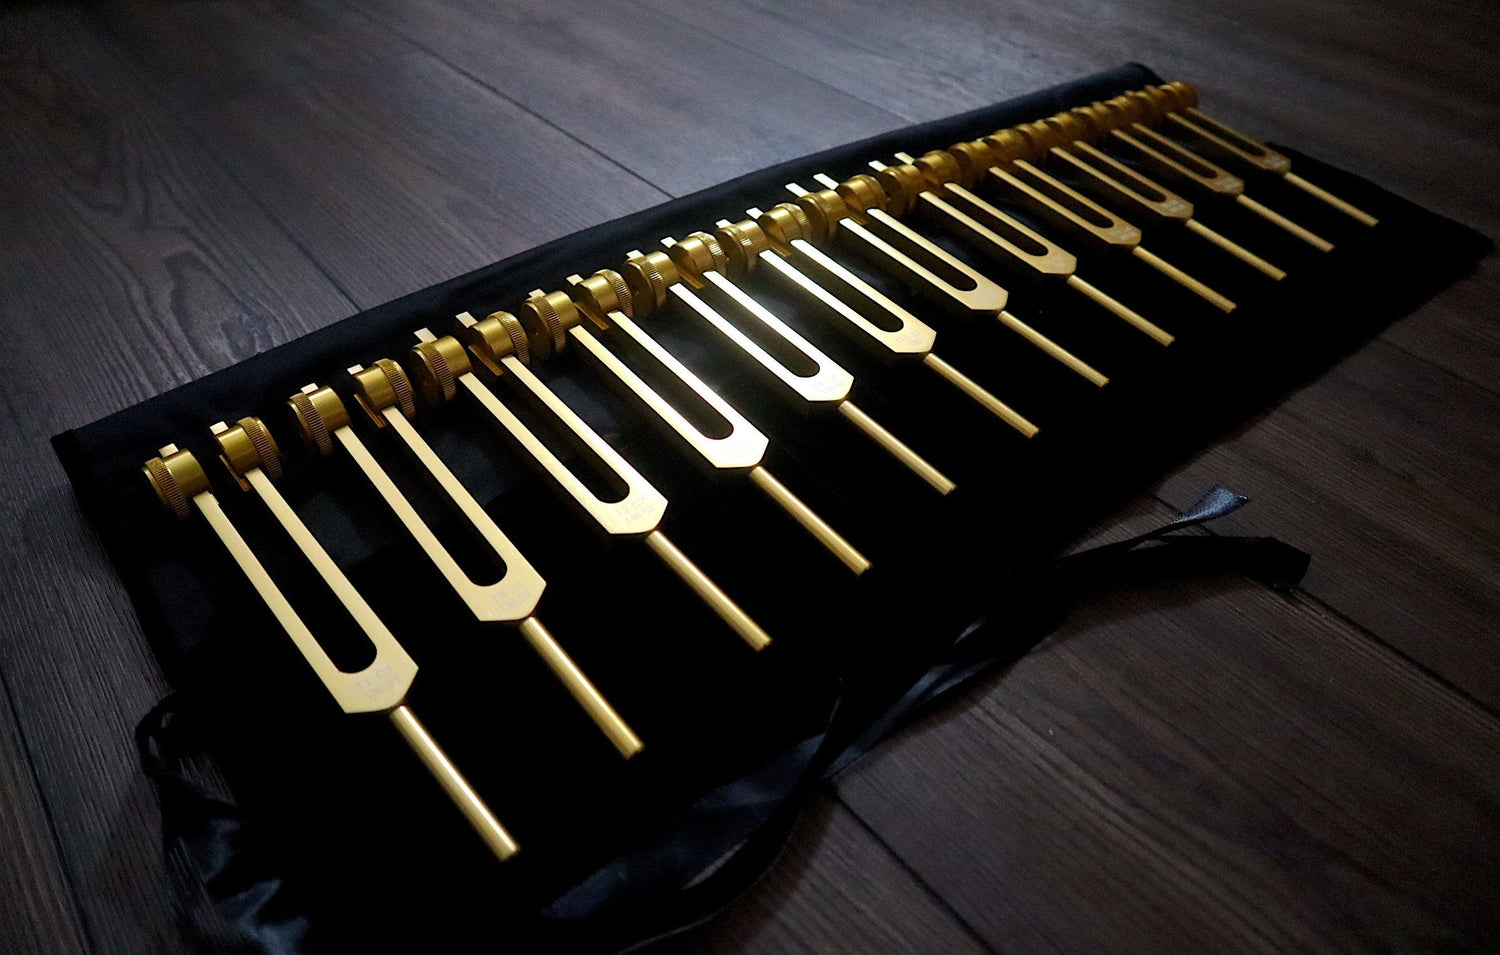 12pc Song of the Spine Tuning Fork Set Professionally Tuned .25 Hz - Bio-field - Organs, Tissue, and Cells, Sound Vibration, Bag